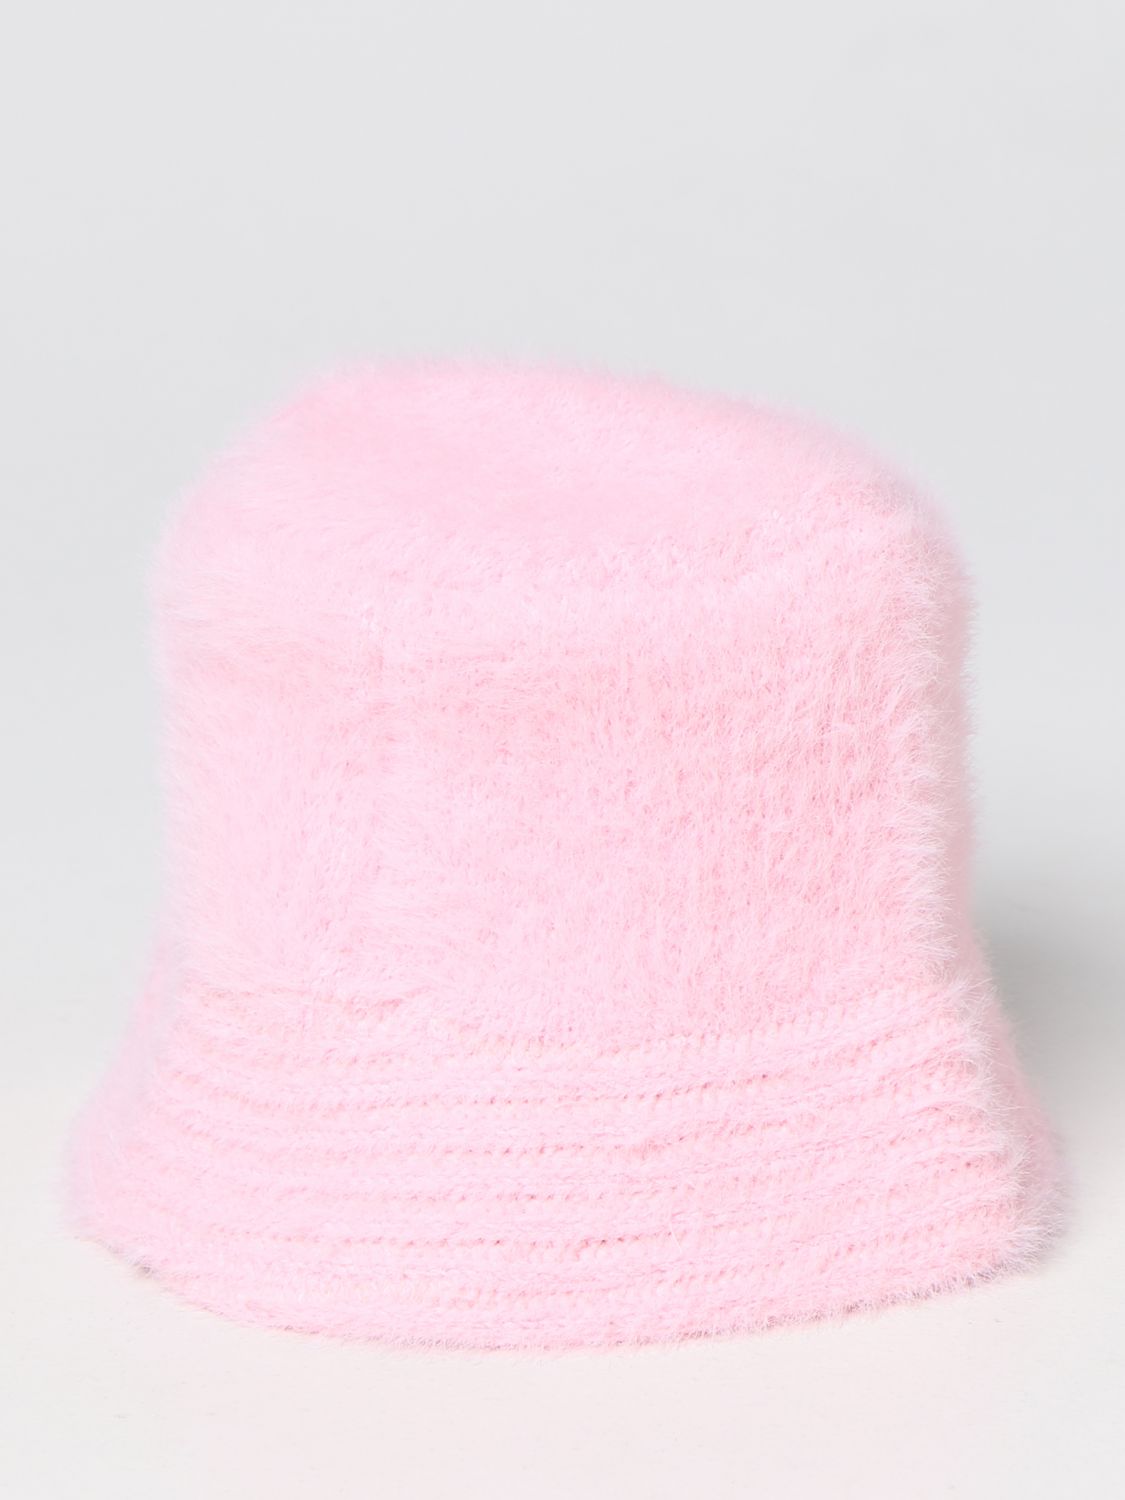 Girls' hats Emilio Pucci: Emilio Pucci girls' hats for kids pink 2